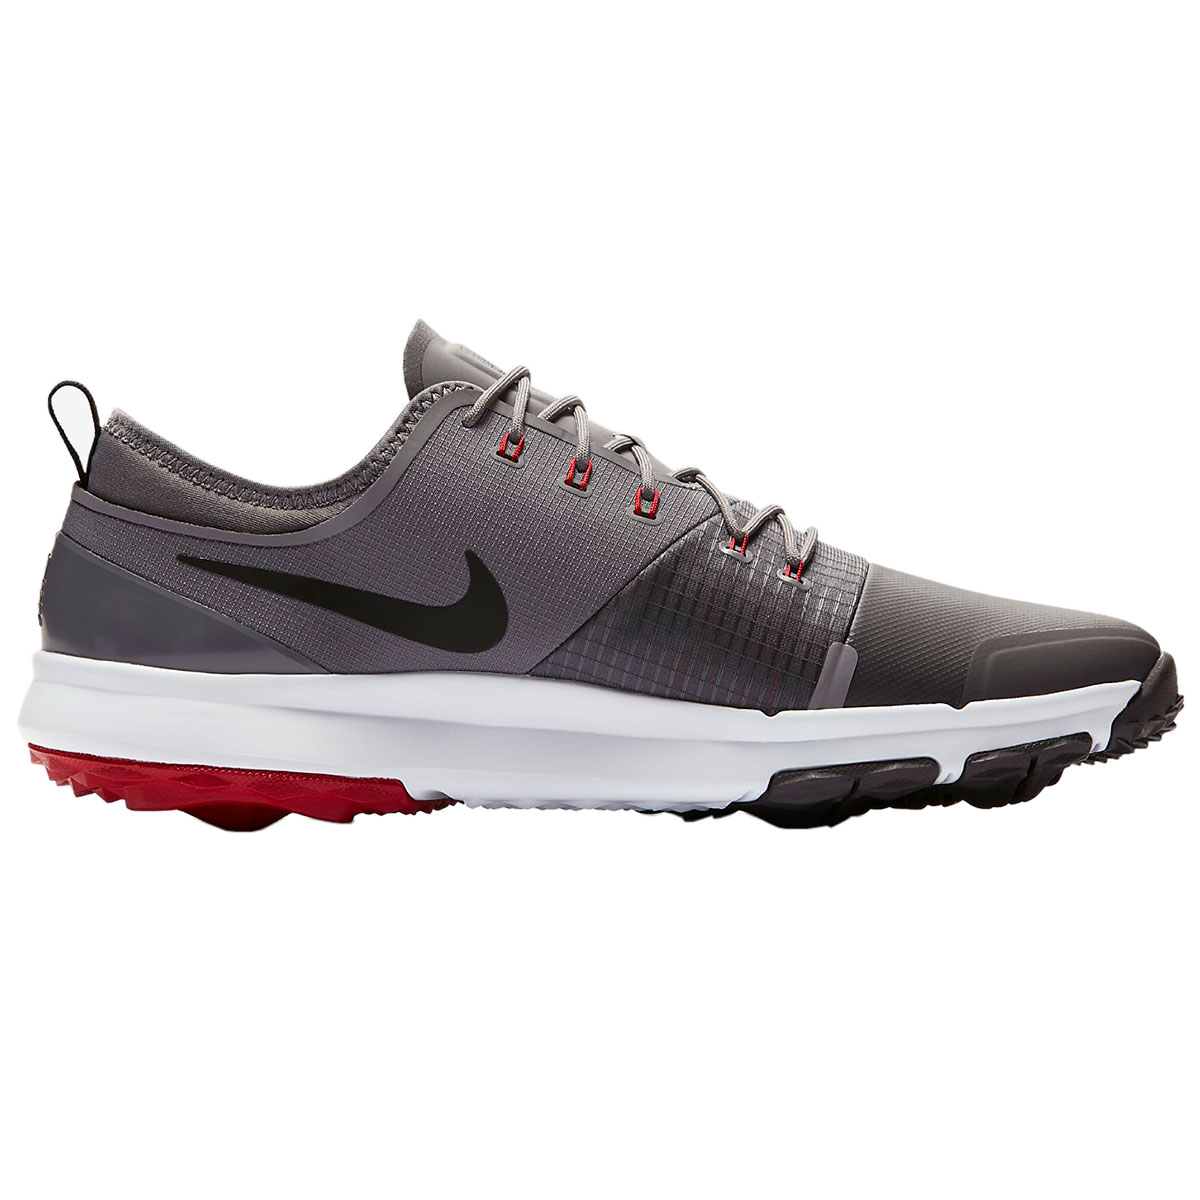 Nike Golf FI Impact 3 Shoes from 